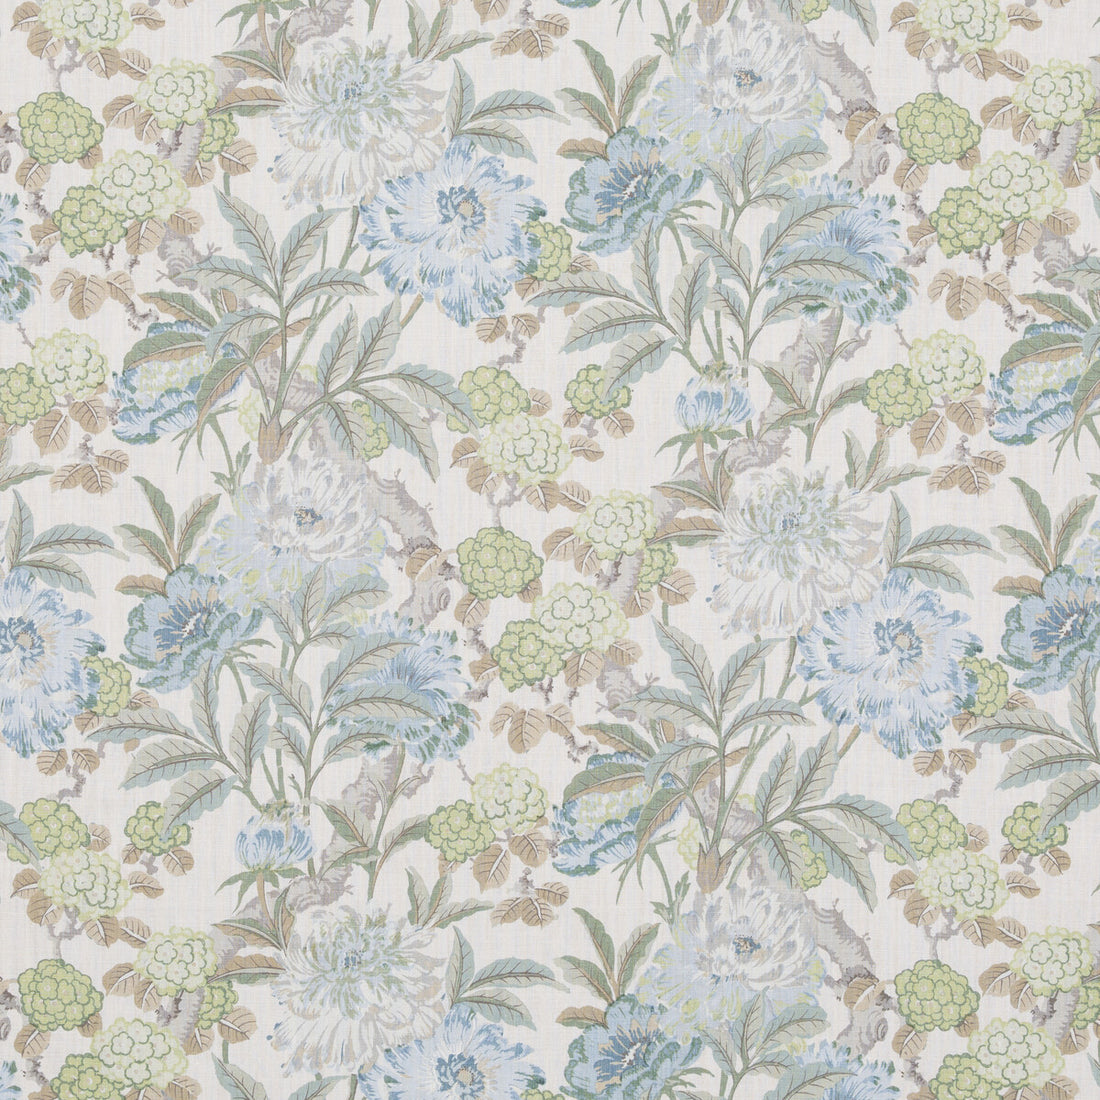 Summer Peony fabric in aqua color - pattern BP10950.4.0 - by G P &amp; J Baker in the Ashmore collection